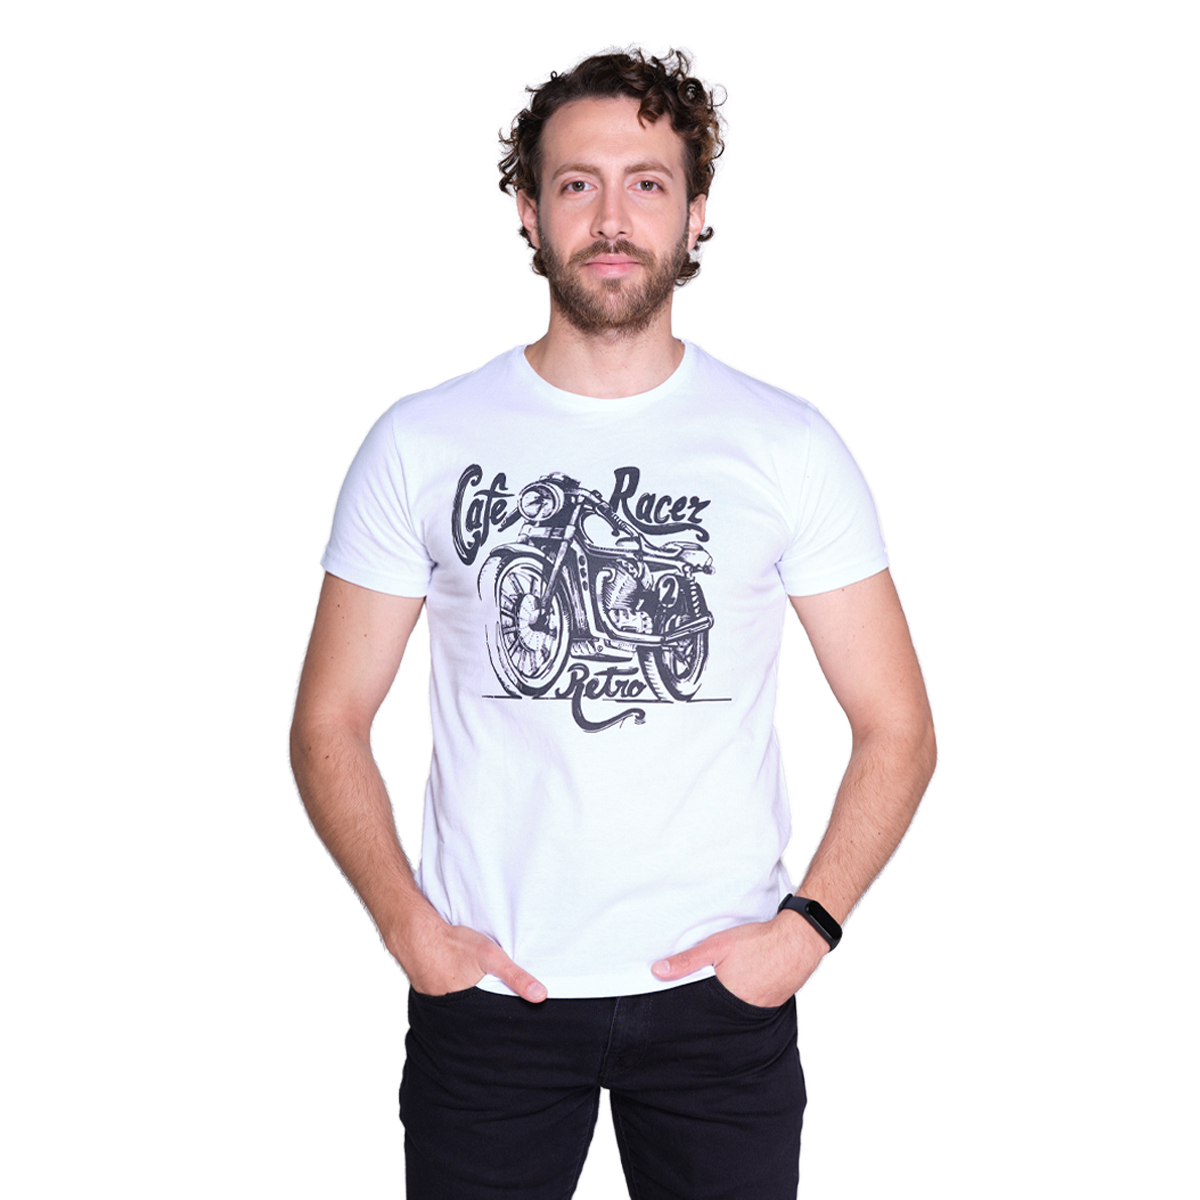 Ride to Love - Motorcycle - Cafe Racer White T-shirt